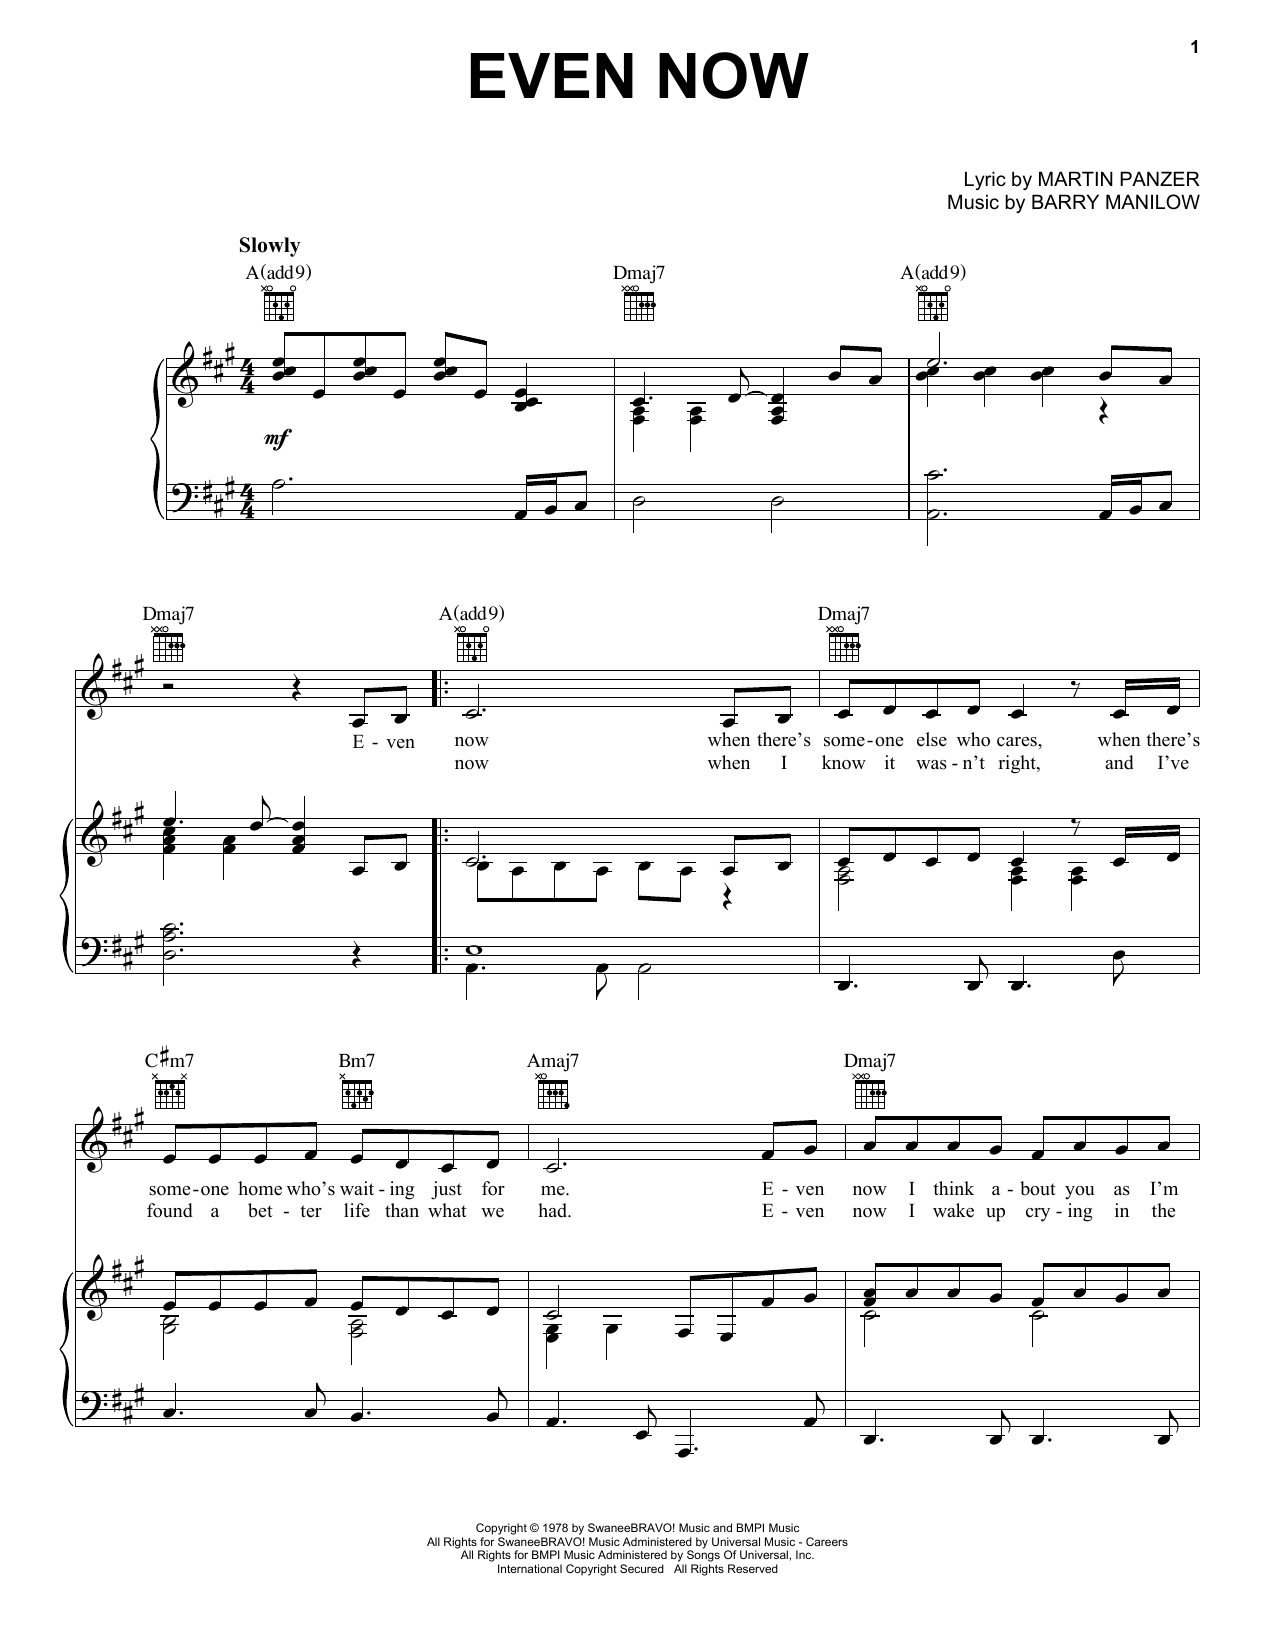 Barry Manilow Even Now sheet music notes and chords. Download Printable PDF.